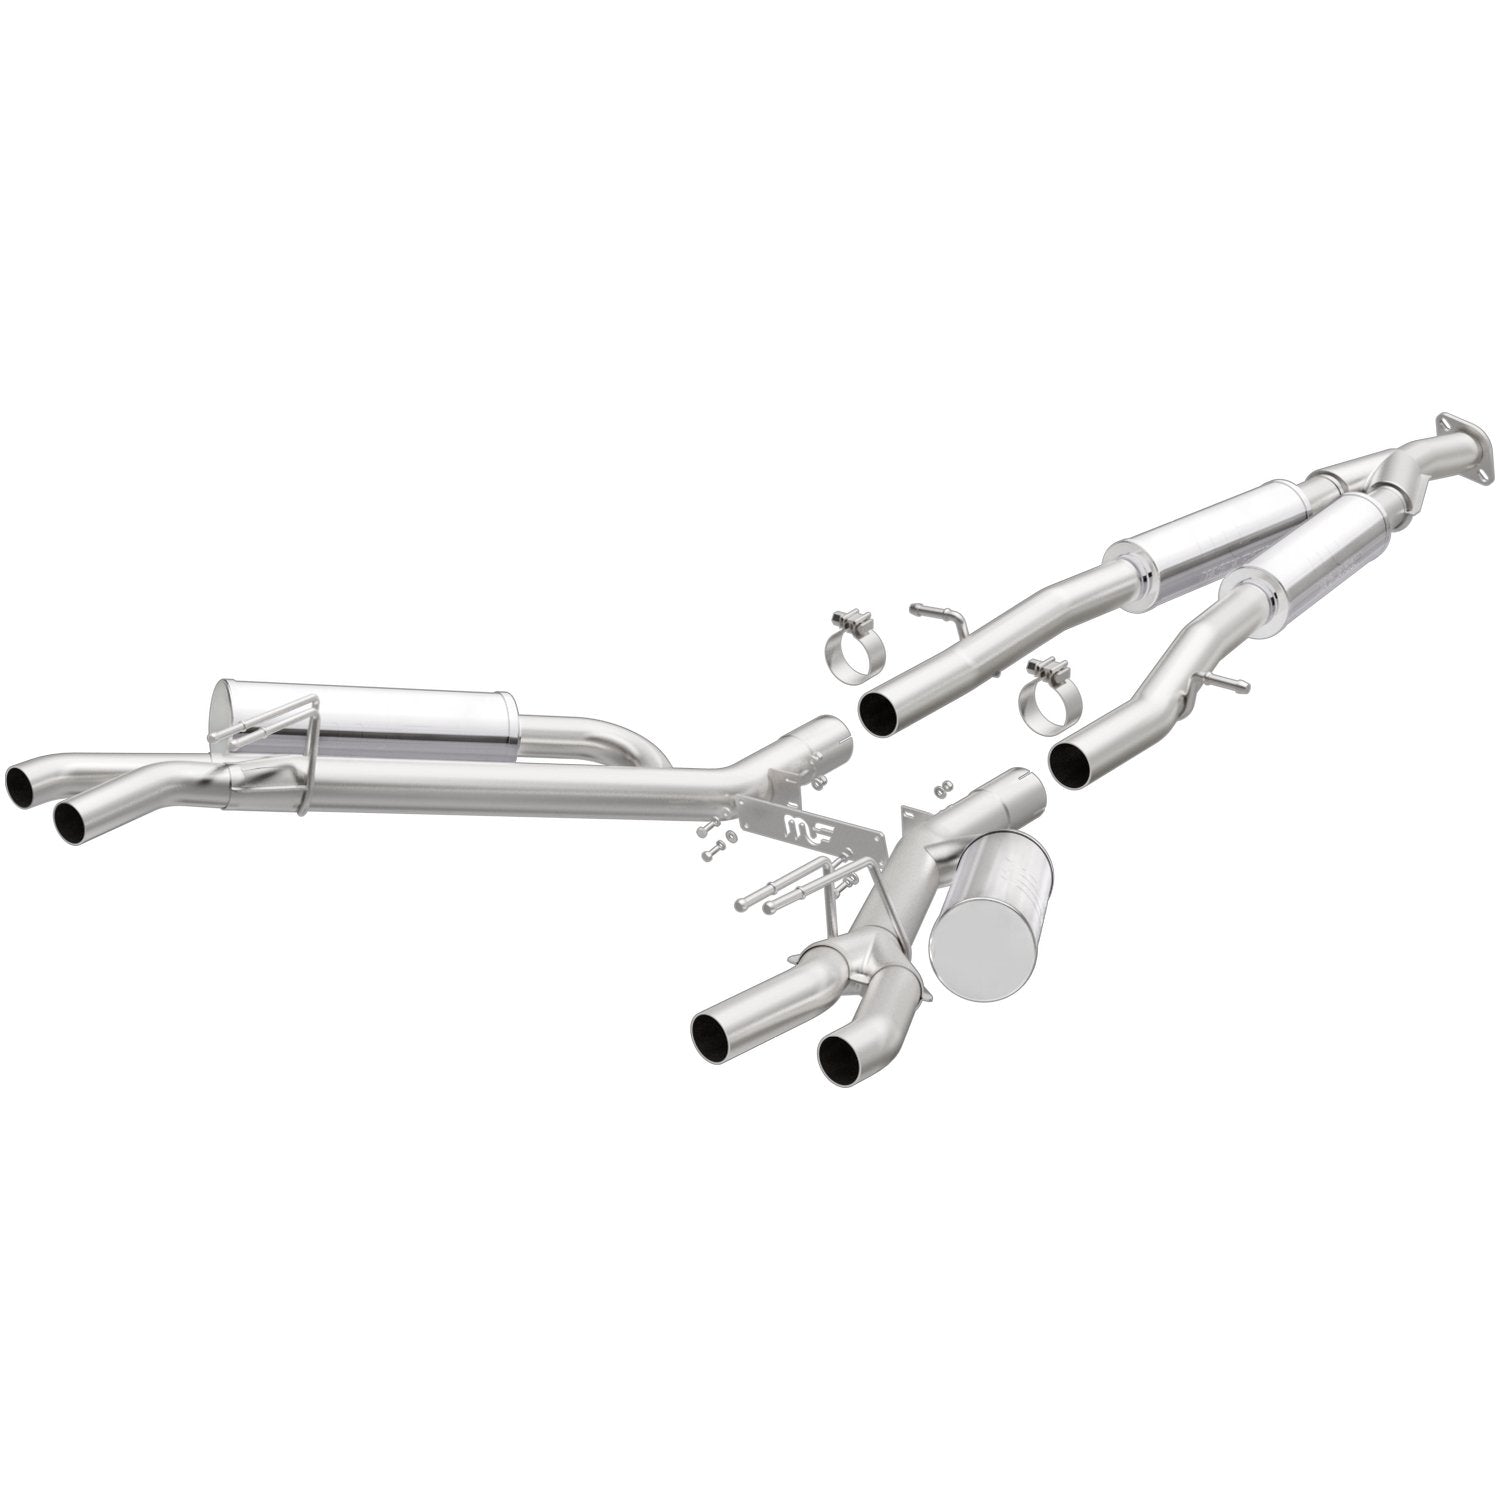 Magnaflow 'Competition' Series Cat-Back Exhaust for Kia Stinger 2.0L I4 2017-20 | #19405 - Available from NEMESISUK.COM